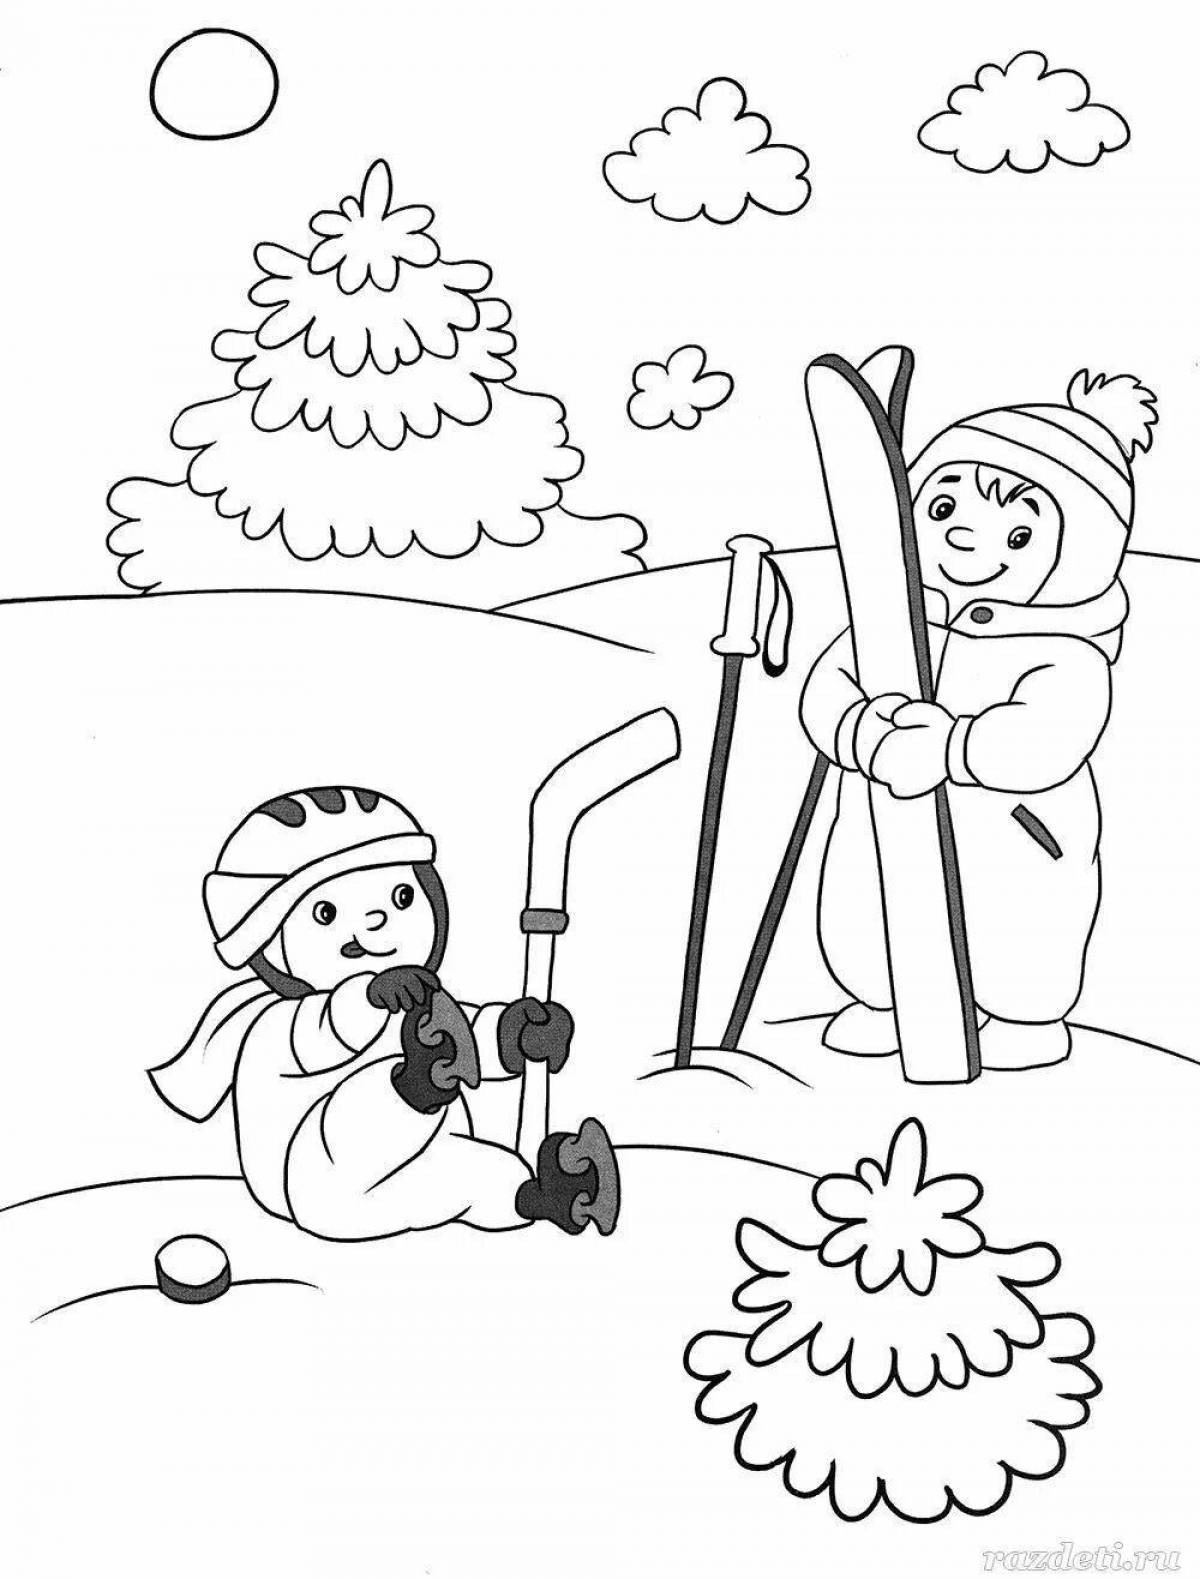 Exciting winter holidays coloring book for kids